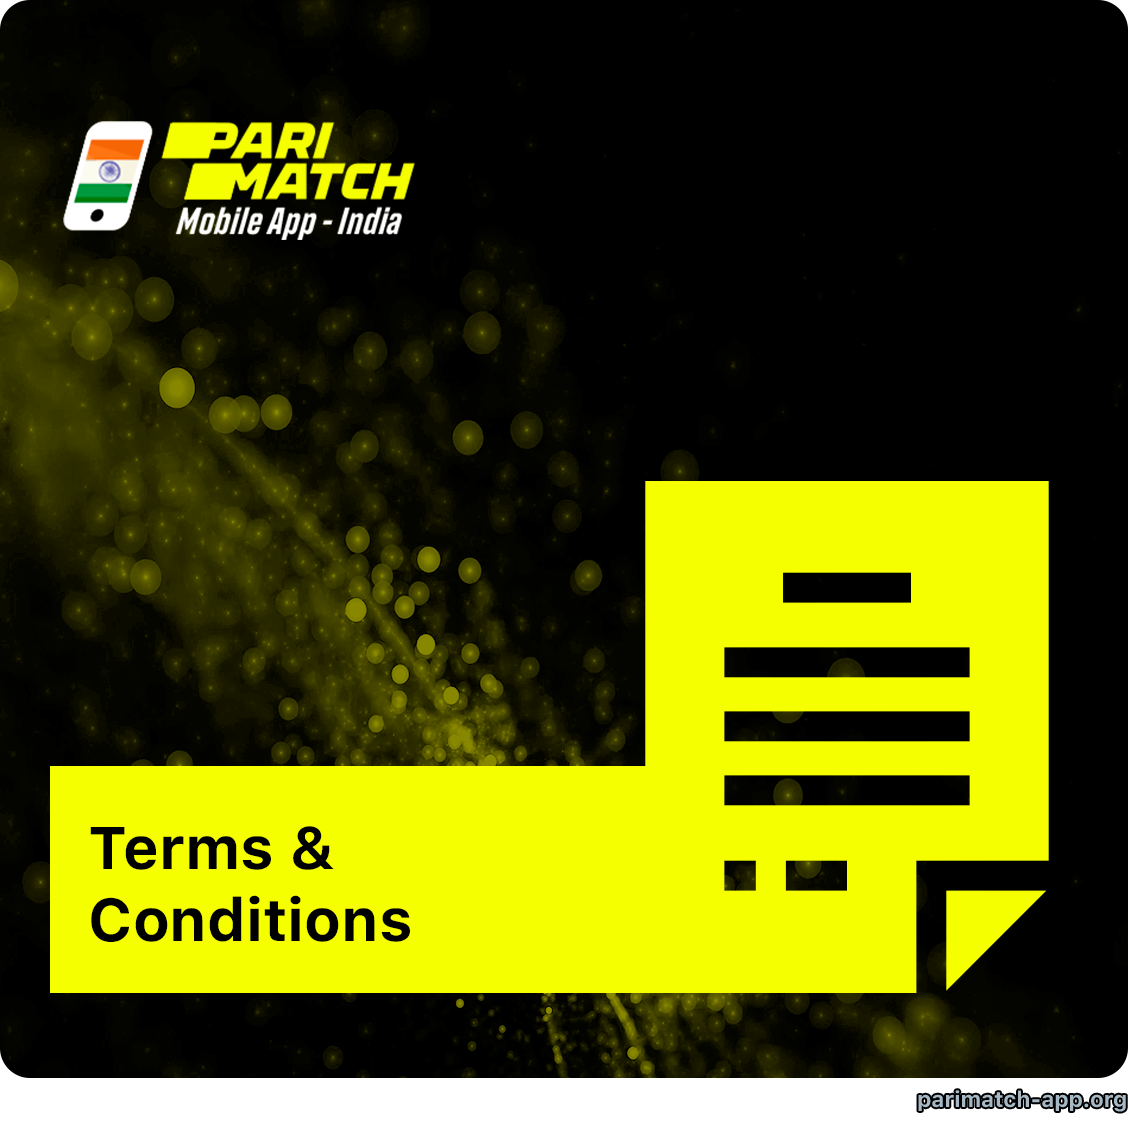 All nessesary information about Parimatch India Terms and Conditions